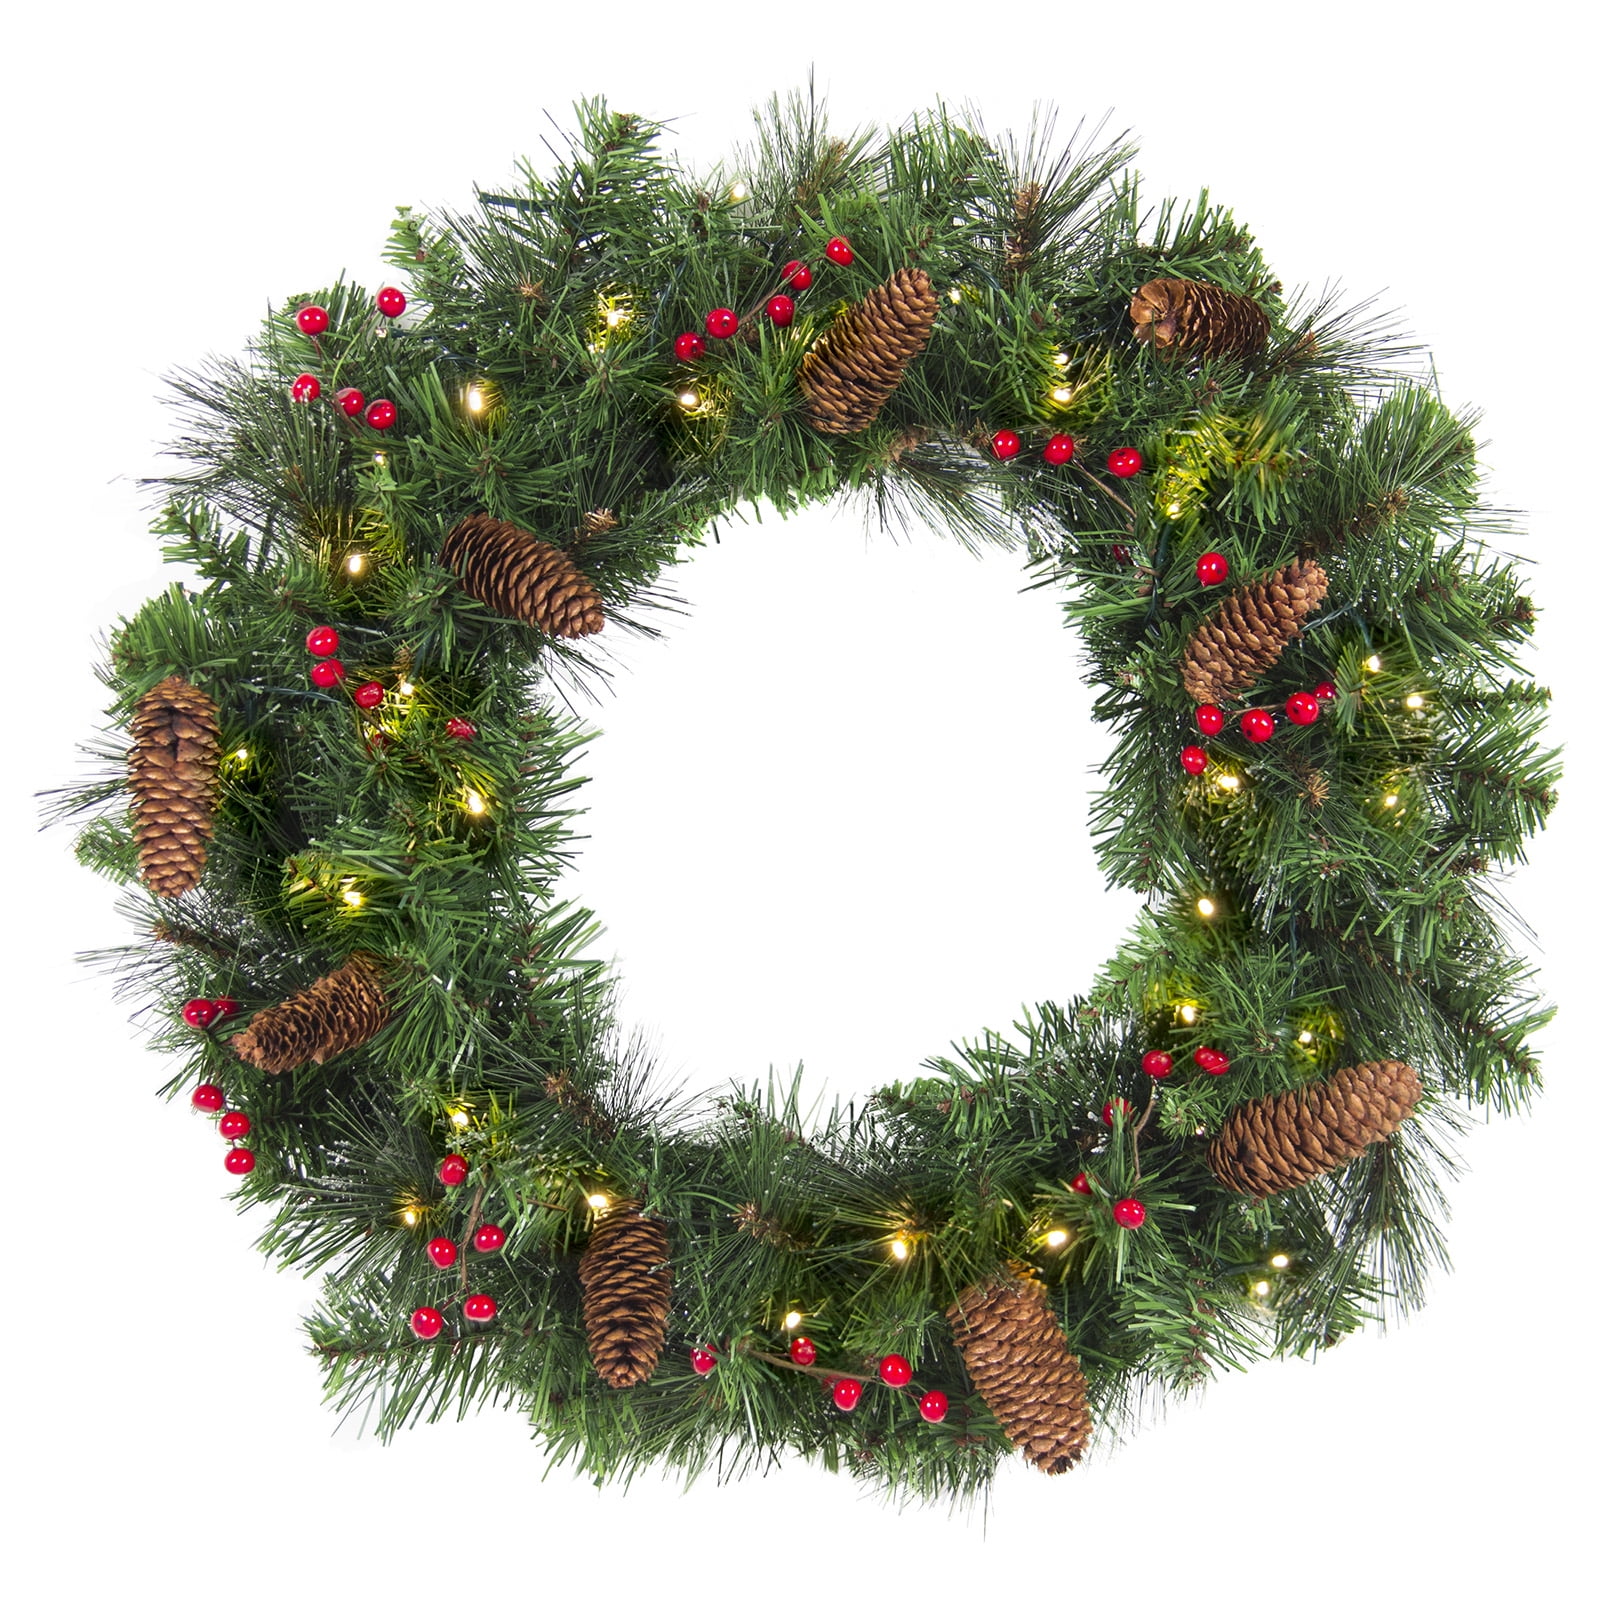 Homegear Christmas 24" Decorated Wreath with Lights Green Spruce with Berries 